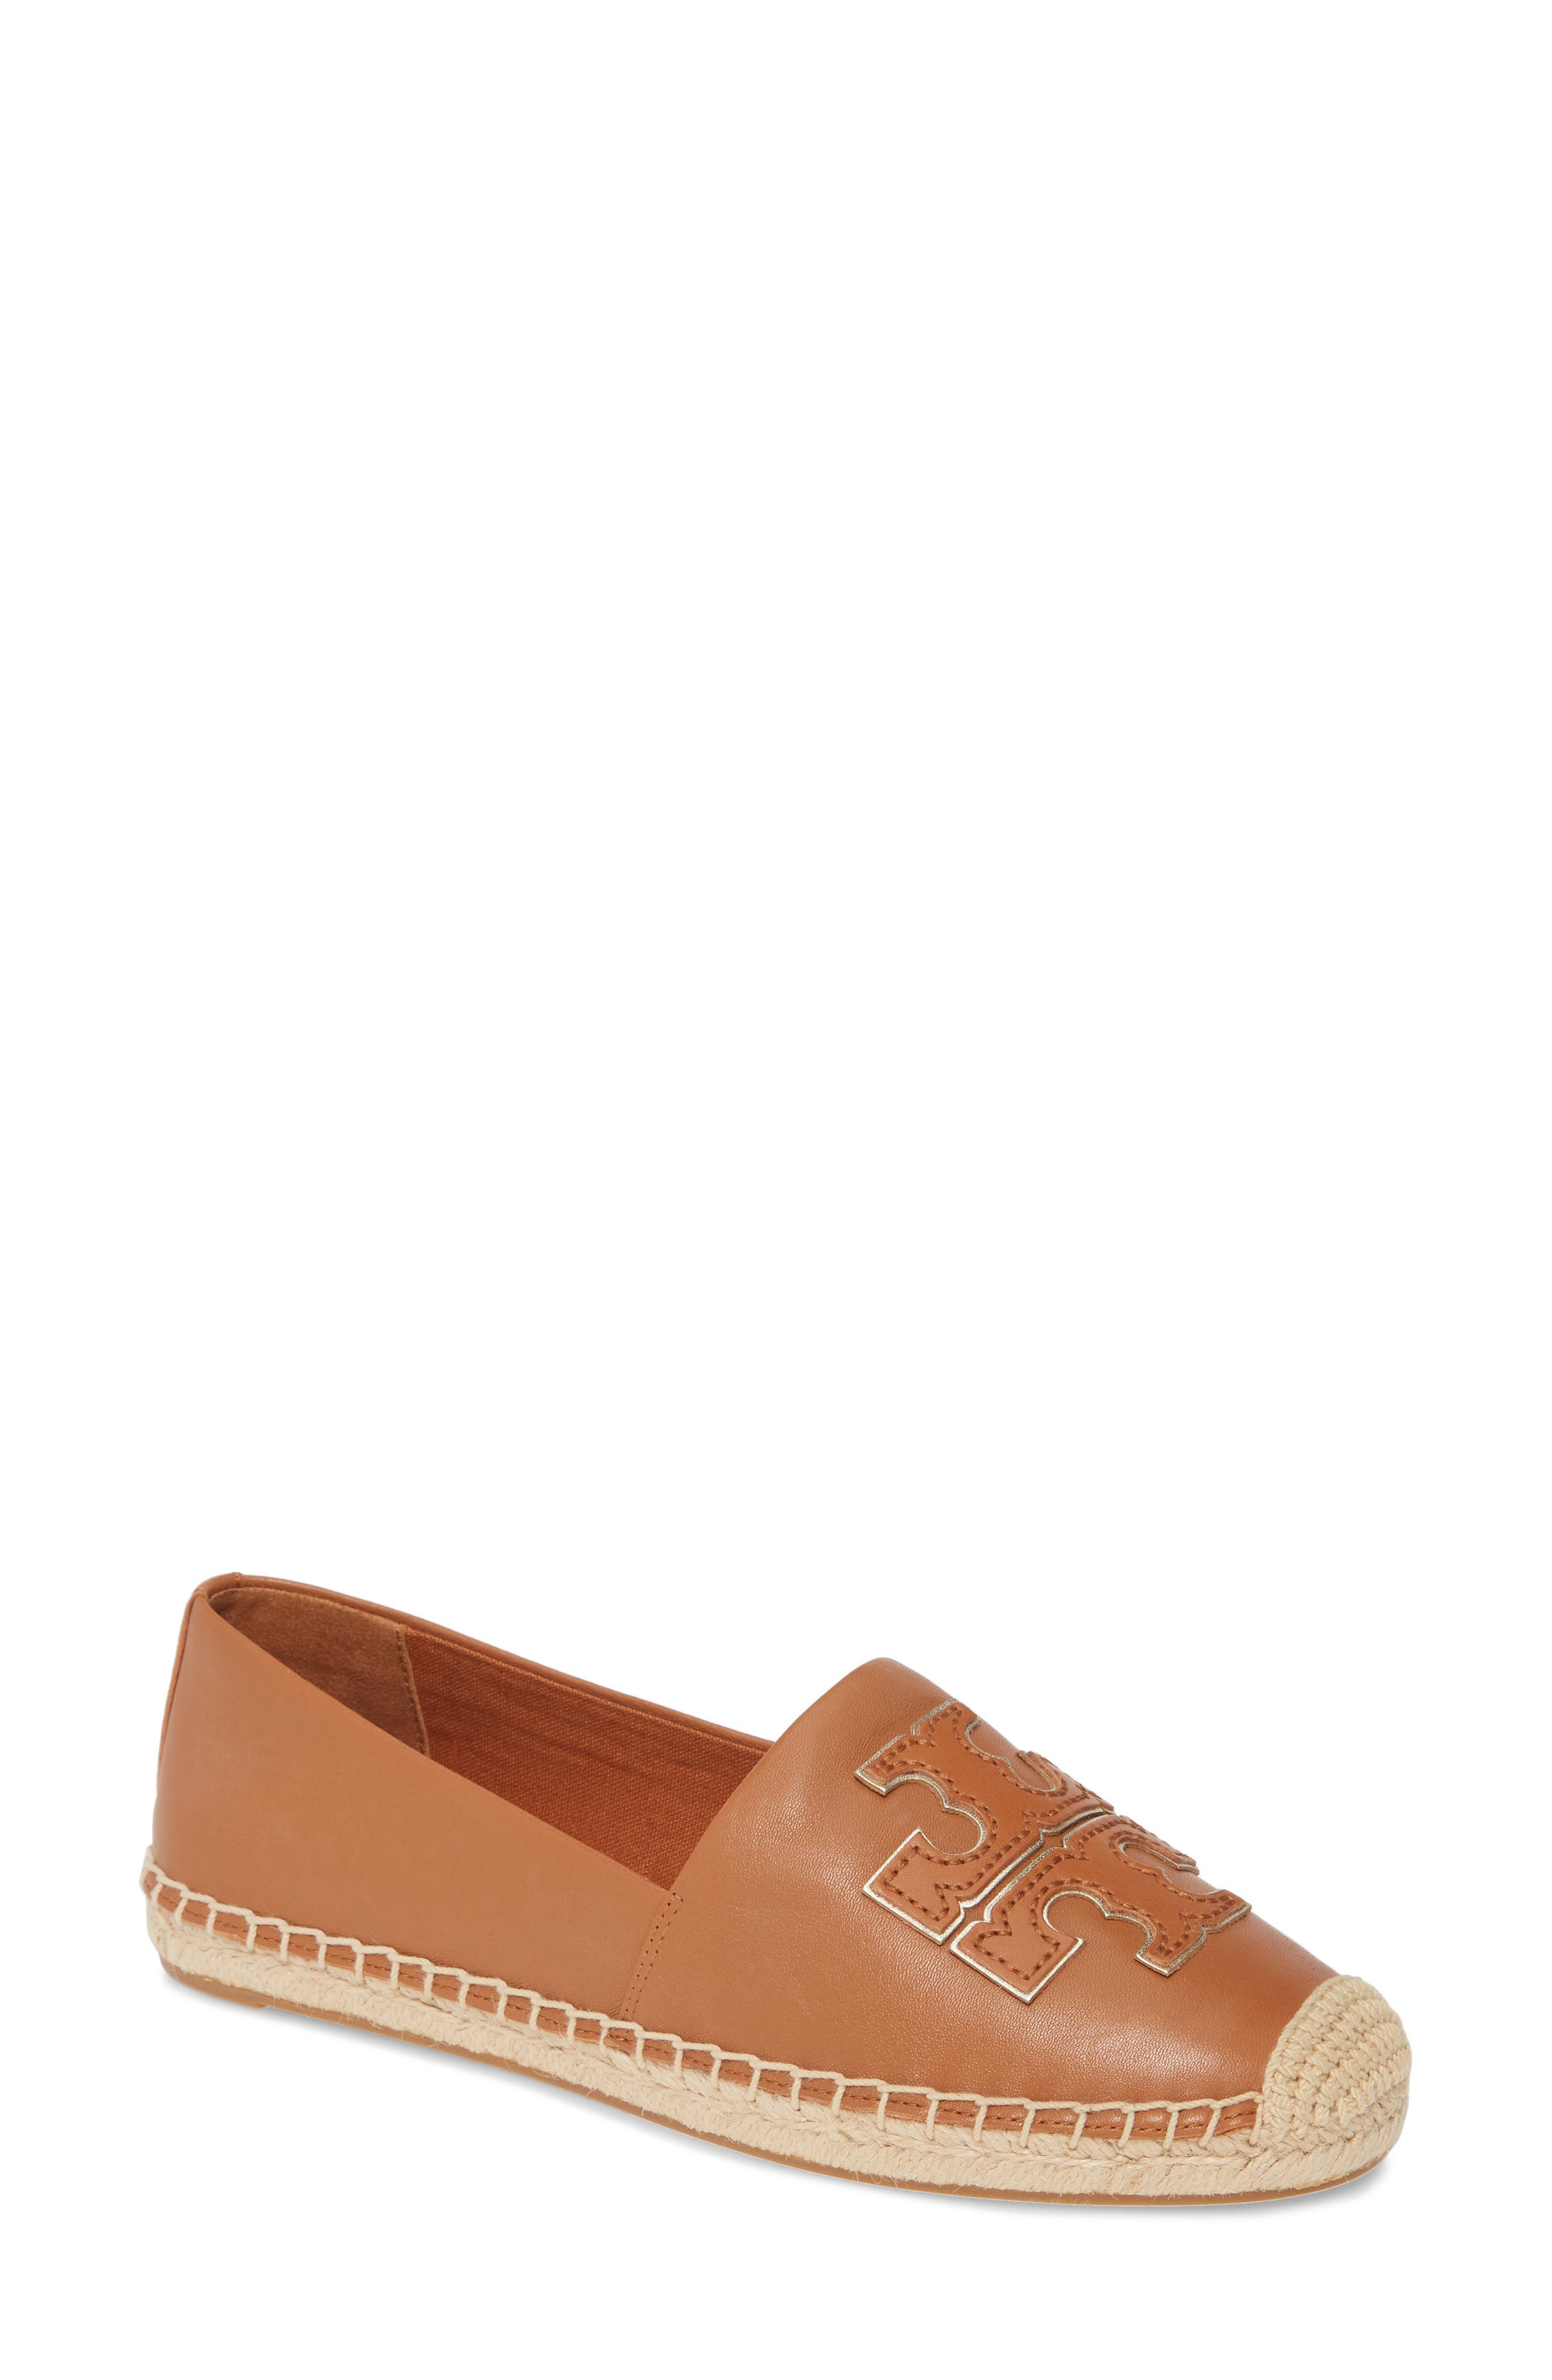 Women's Tory Burch Shoes | Nordstrom